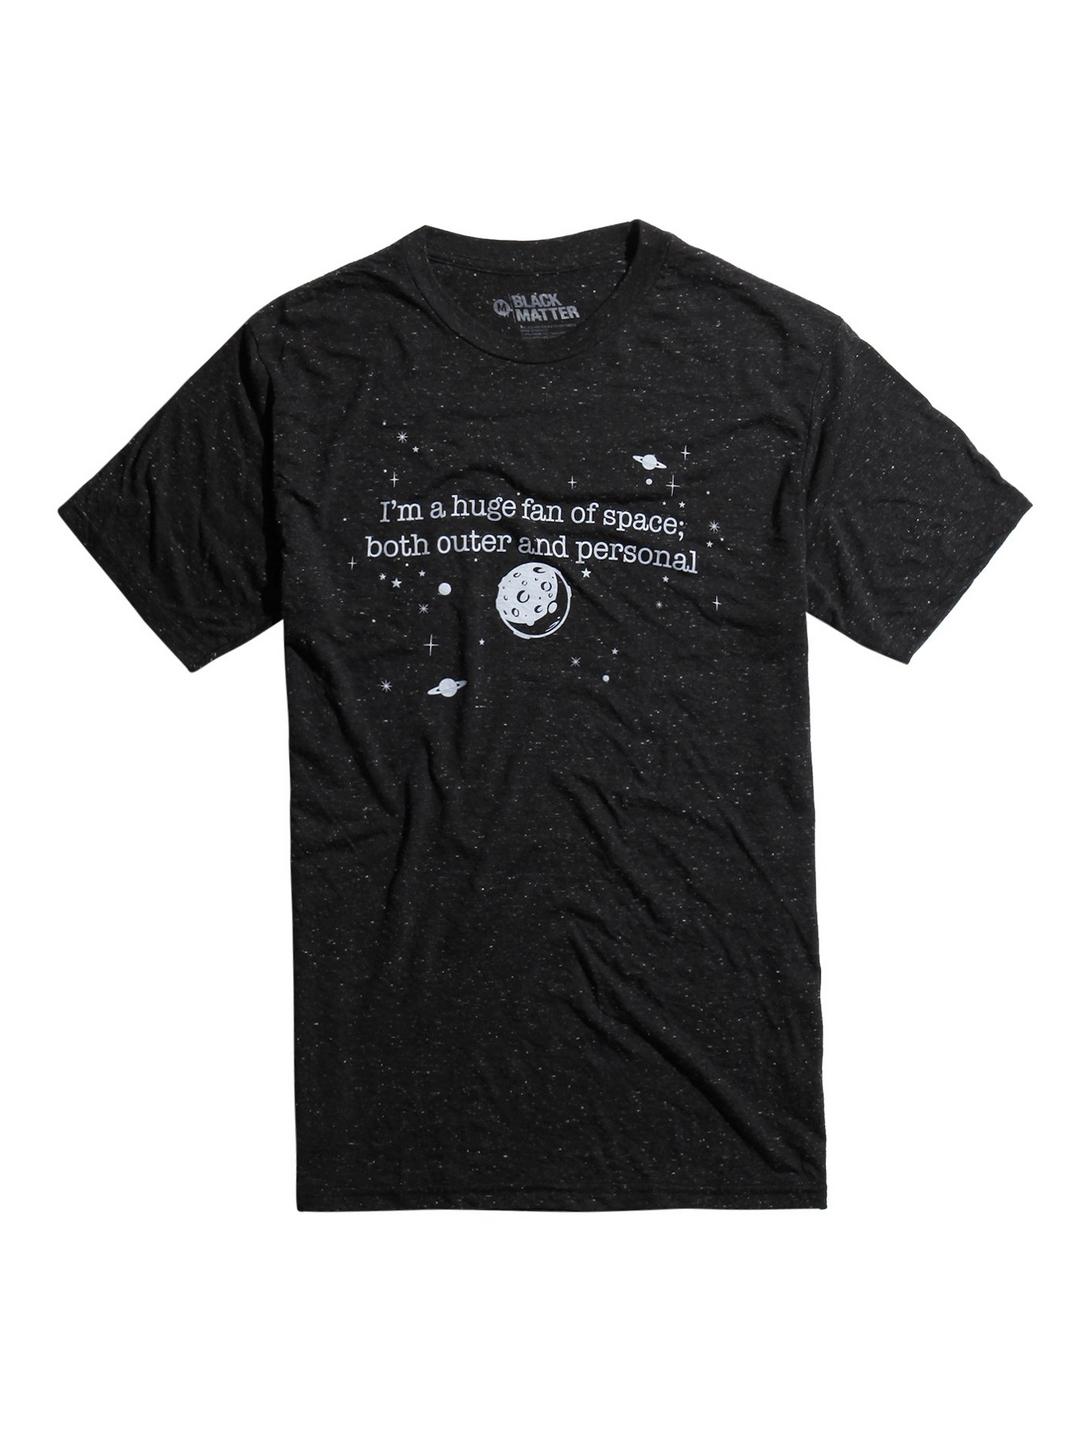 Outer And Personal Space Fan T-Shirt, BLACK, hi-res